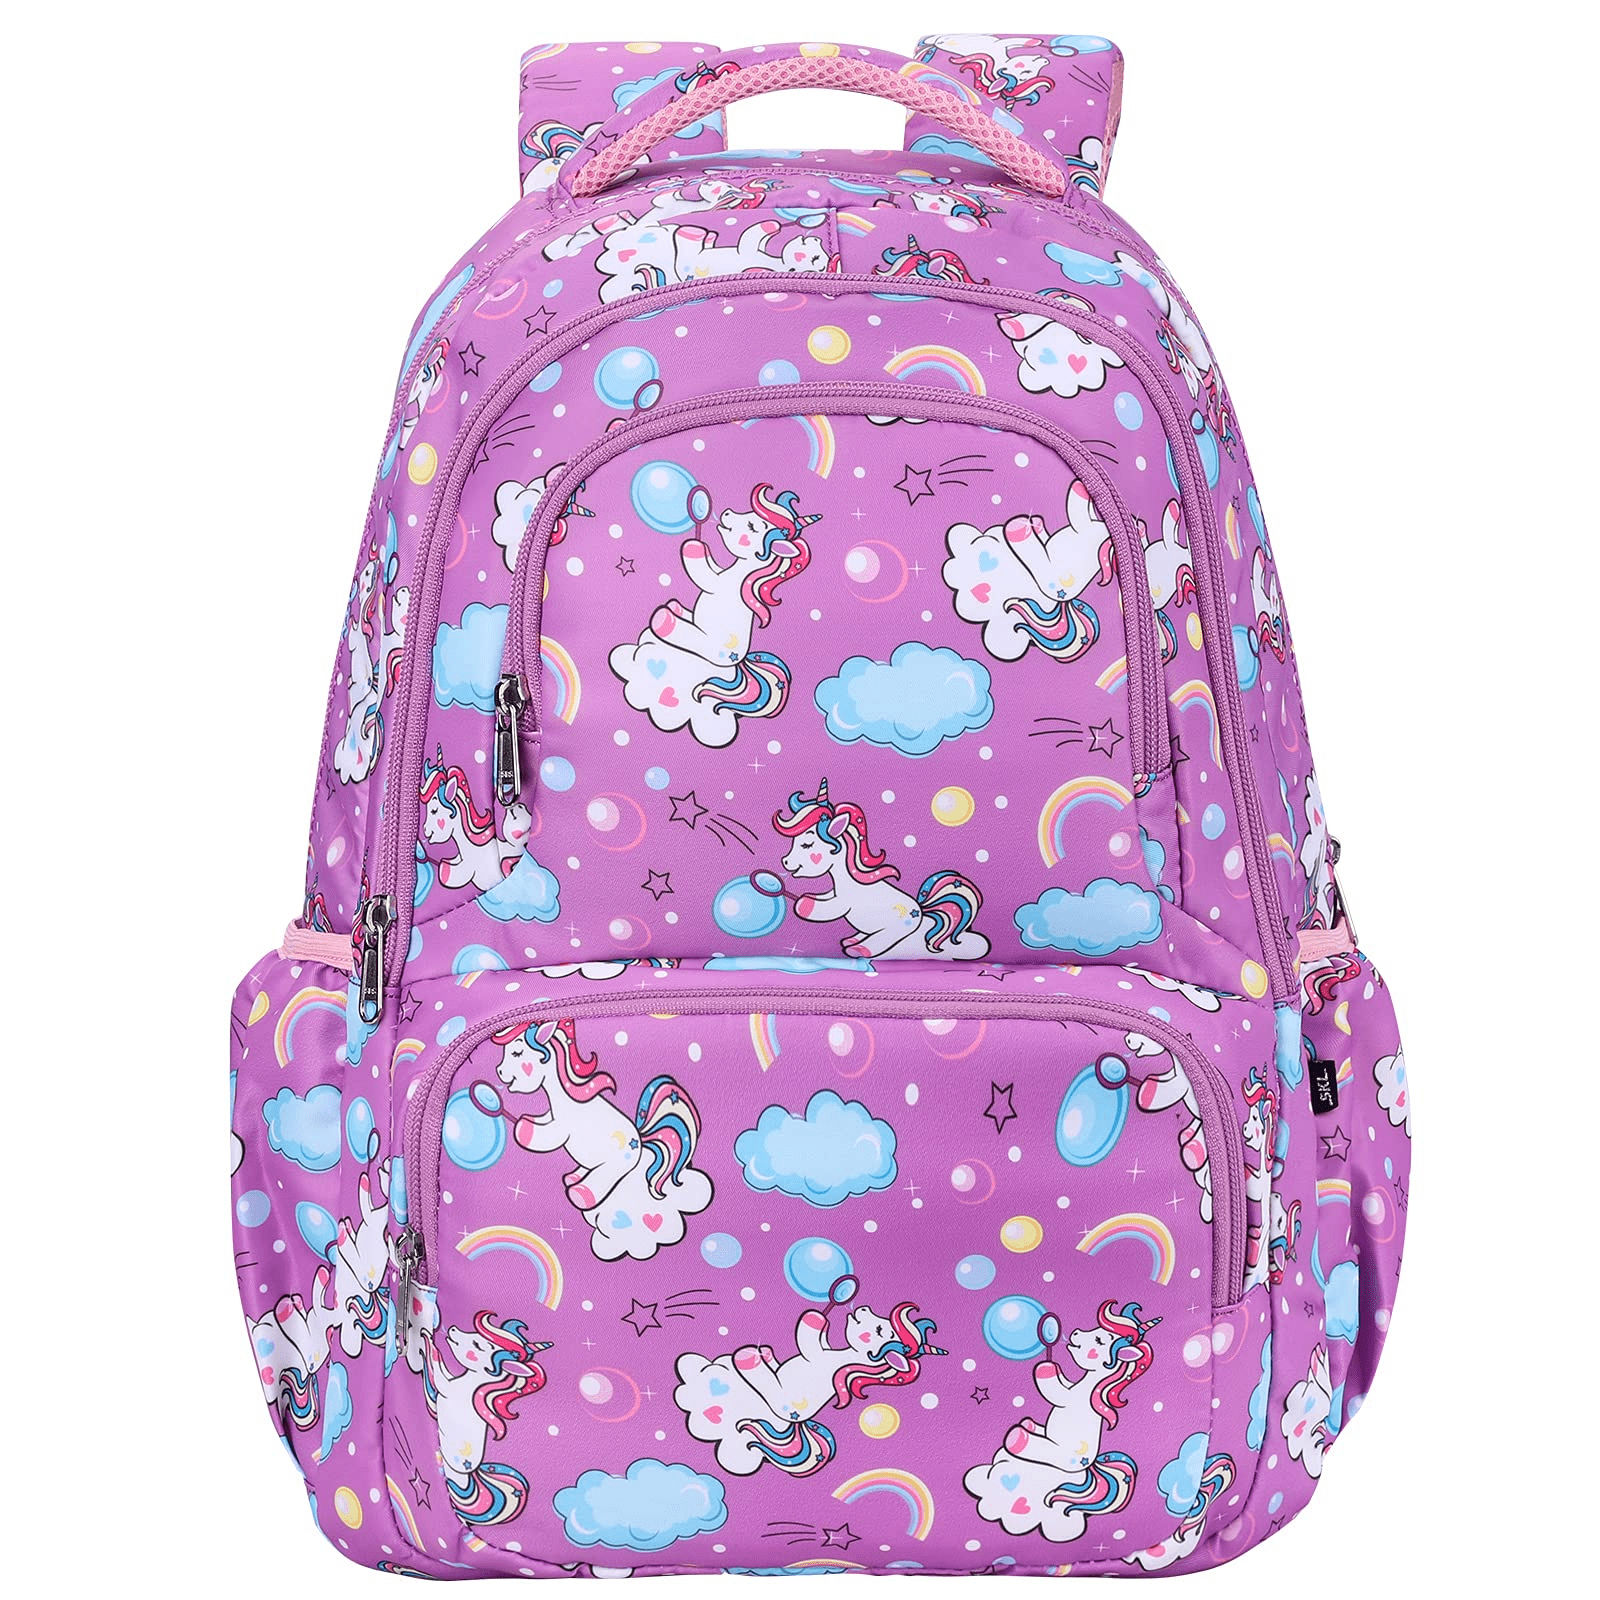 Kid Backpack Girl and Boy Cat Ear Bag for School Classic Bag Large Size Light Weight Have Gift Package … Pink hearts 